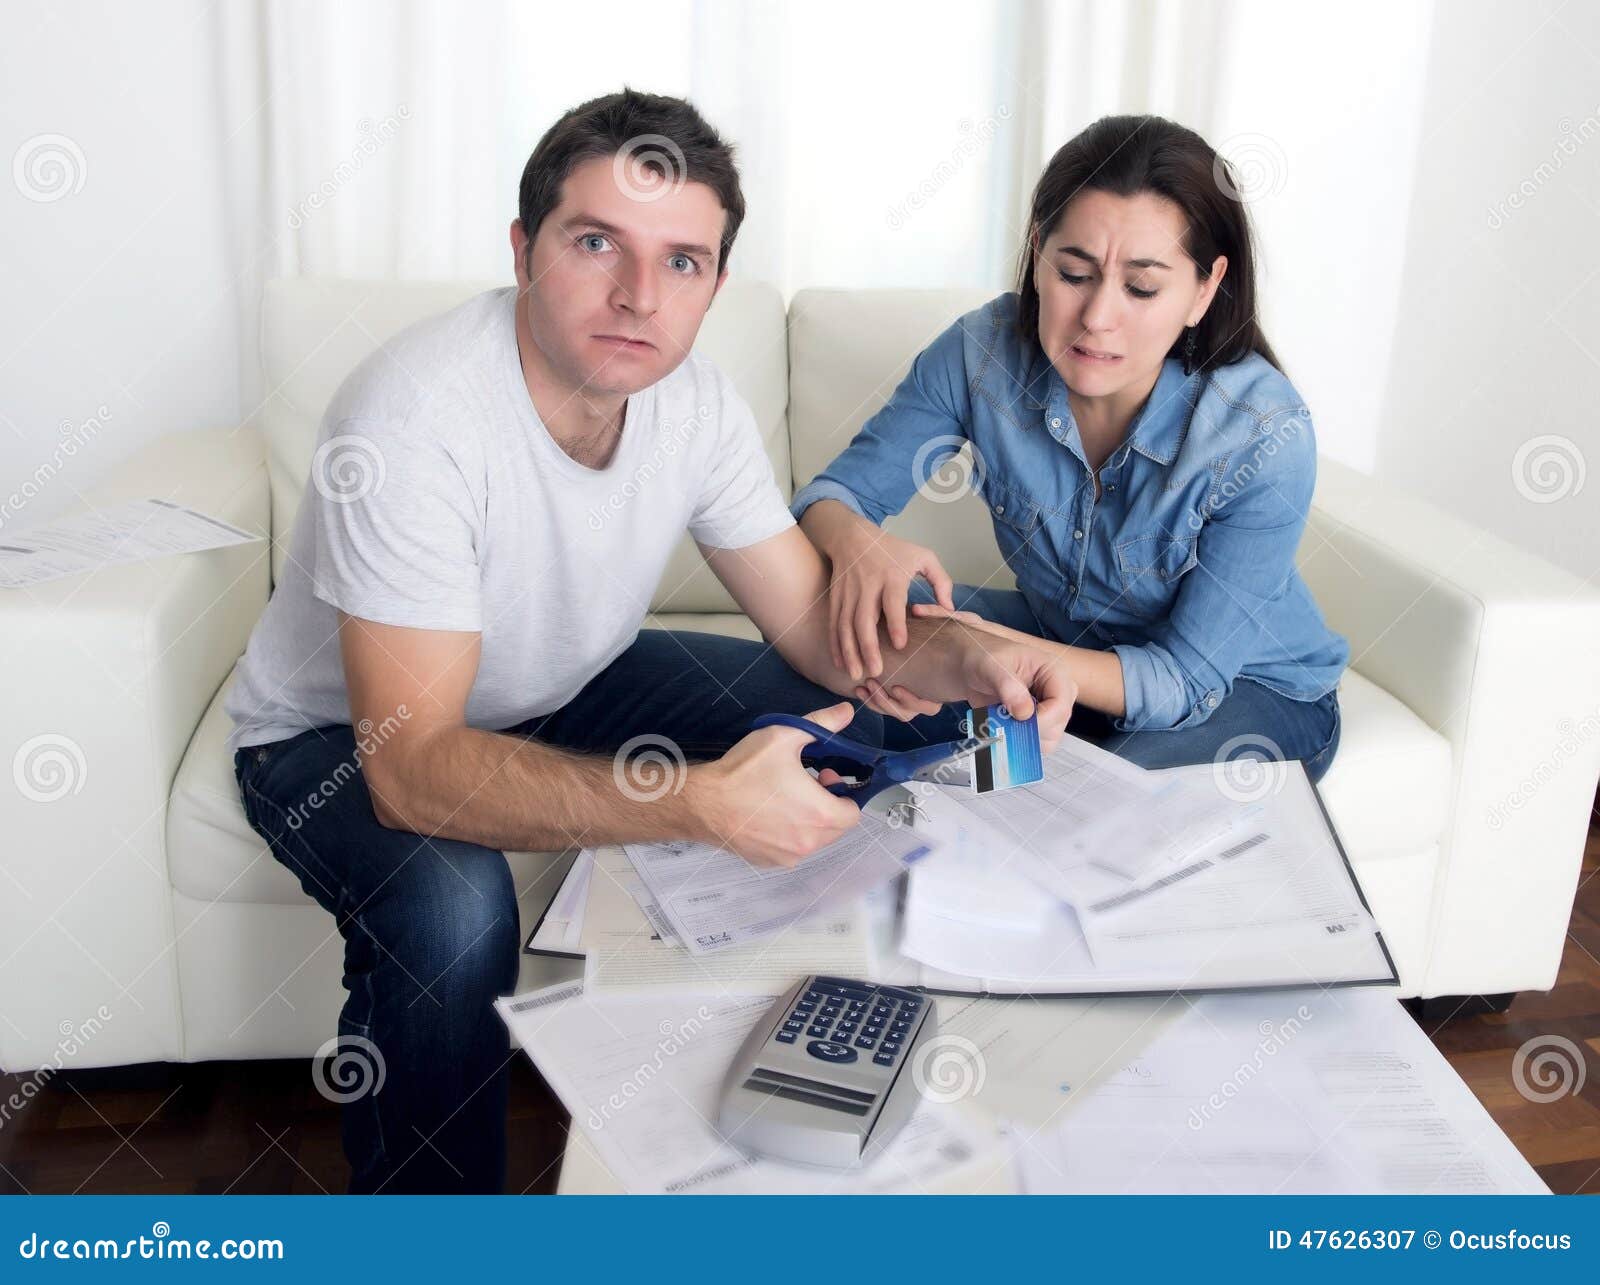 personal loans for students with no cosigner